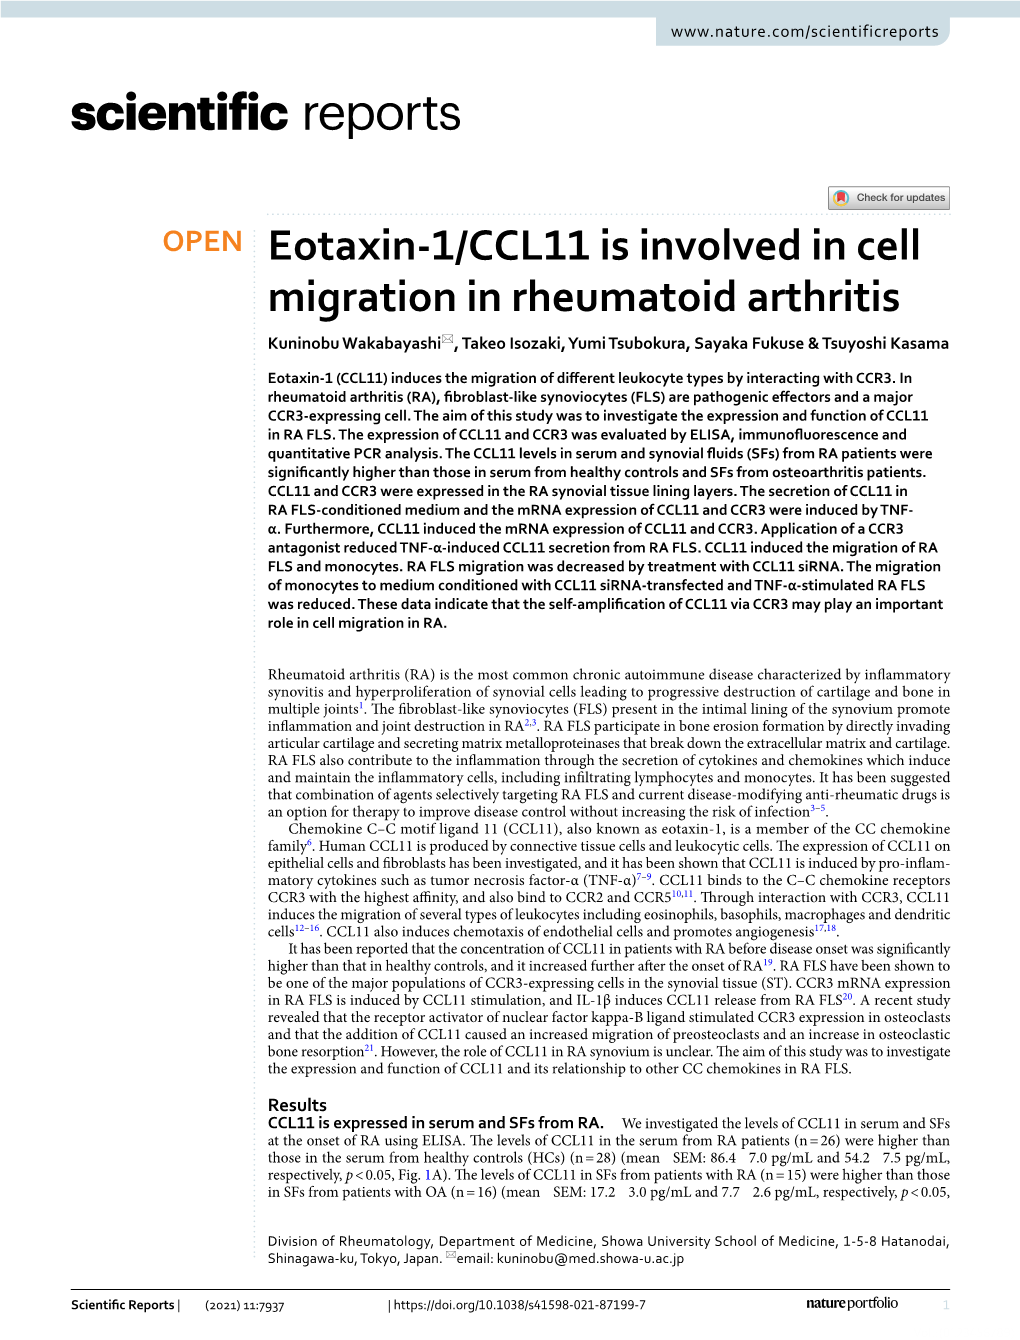 Eotaxin-1/CCL11 Is Involved in Cell Migration in Rheumatoid Arthritis